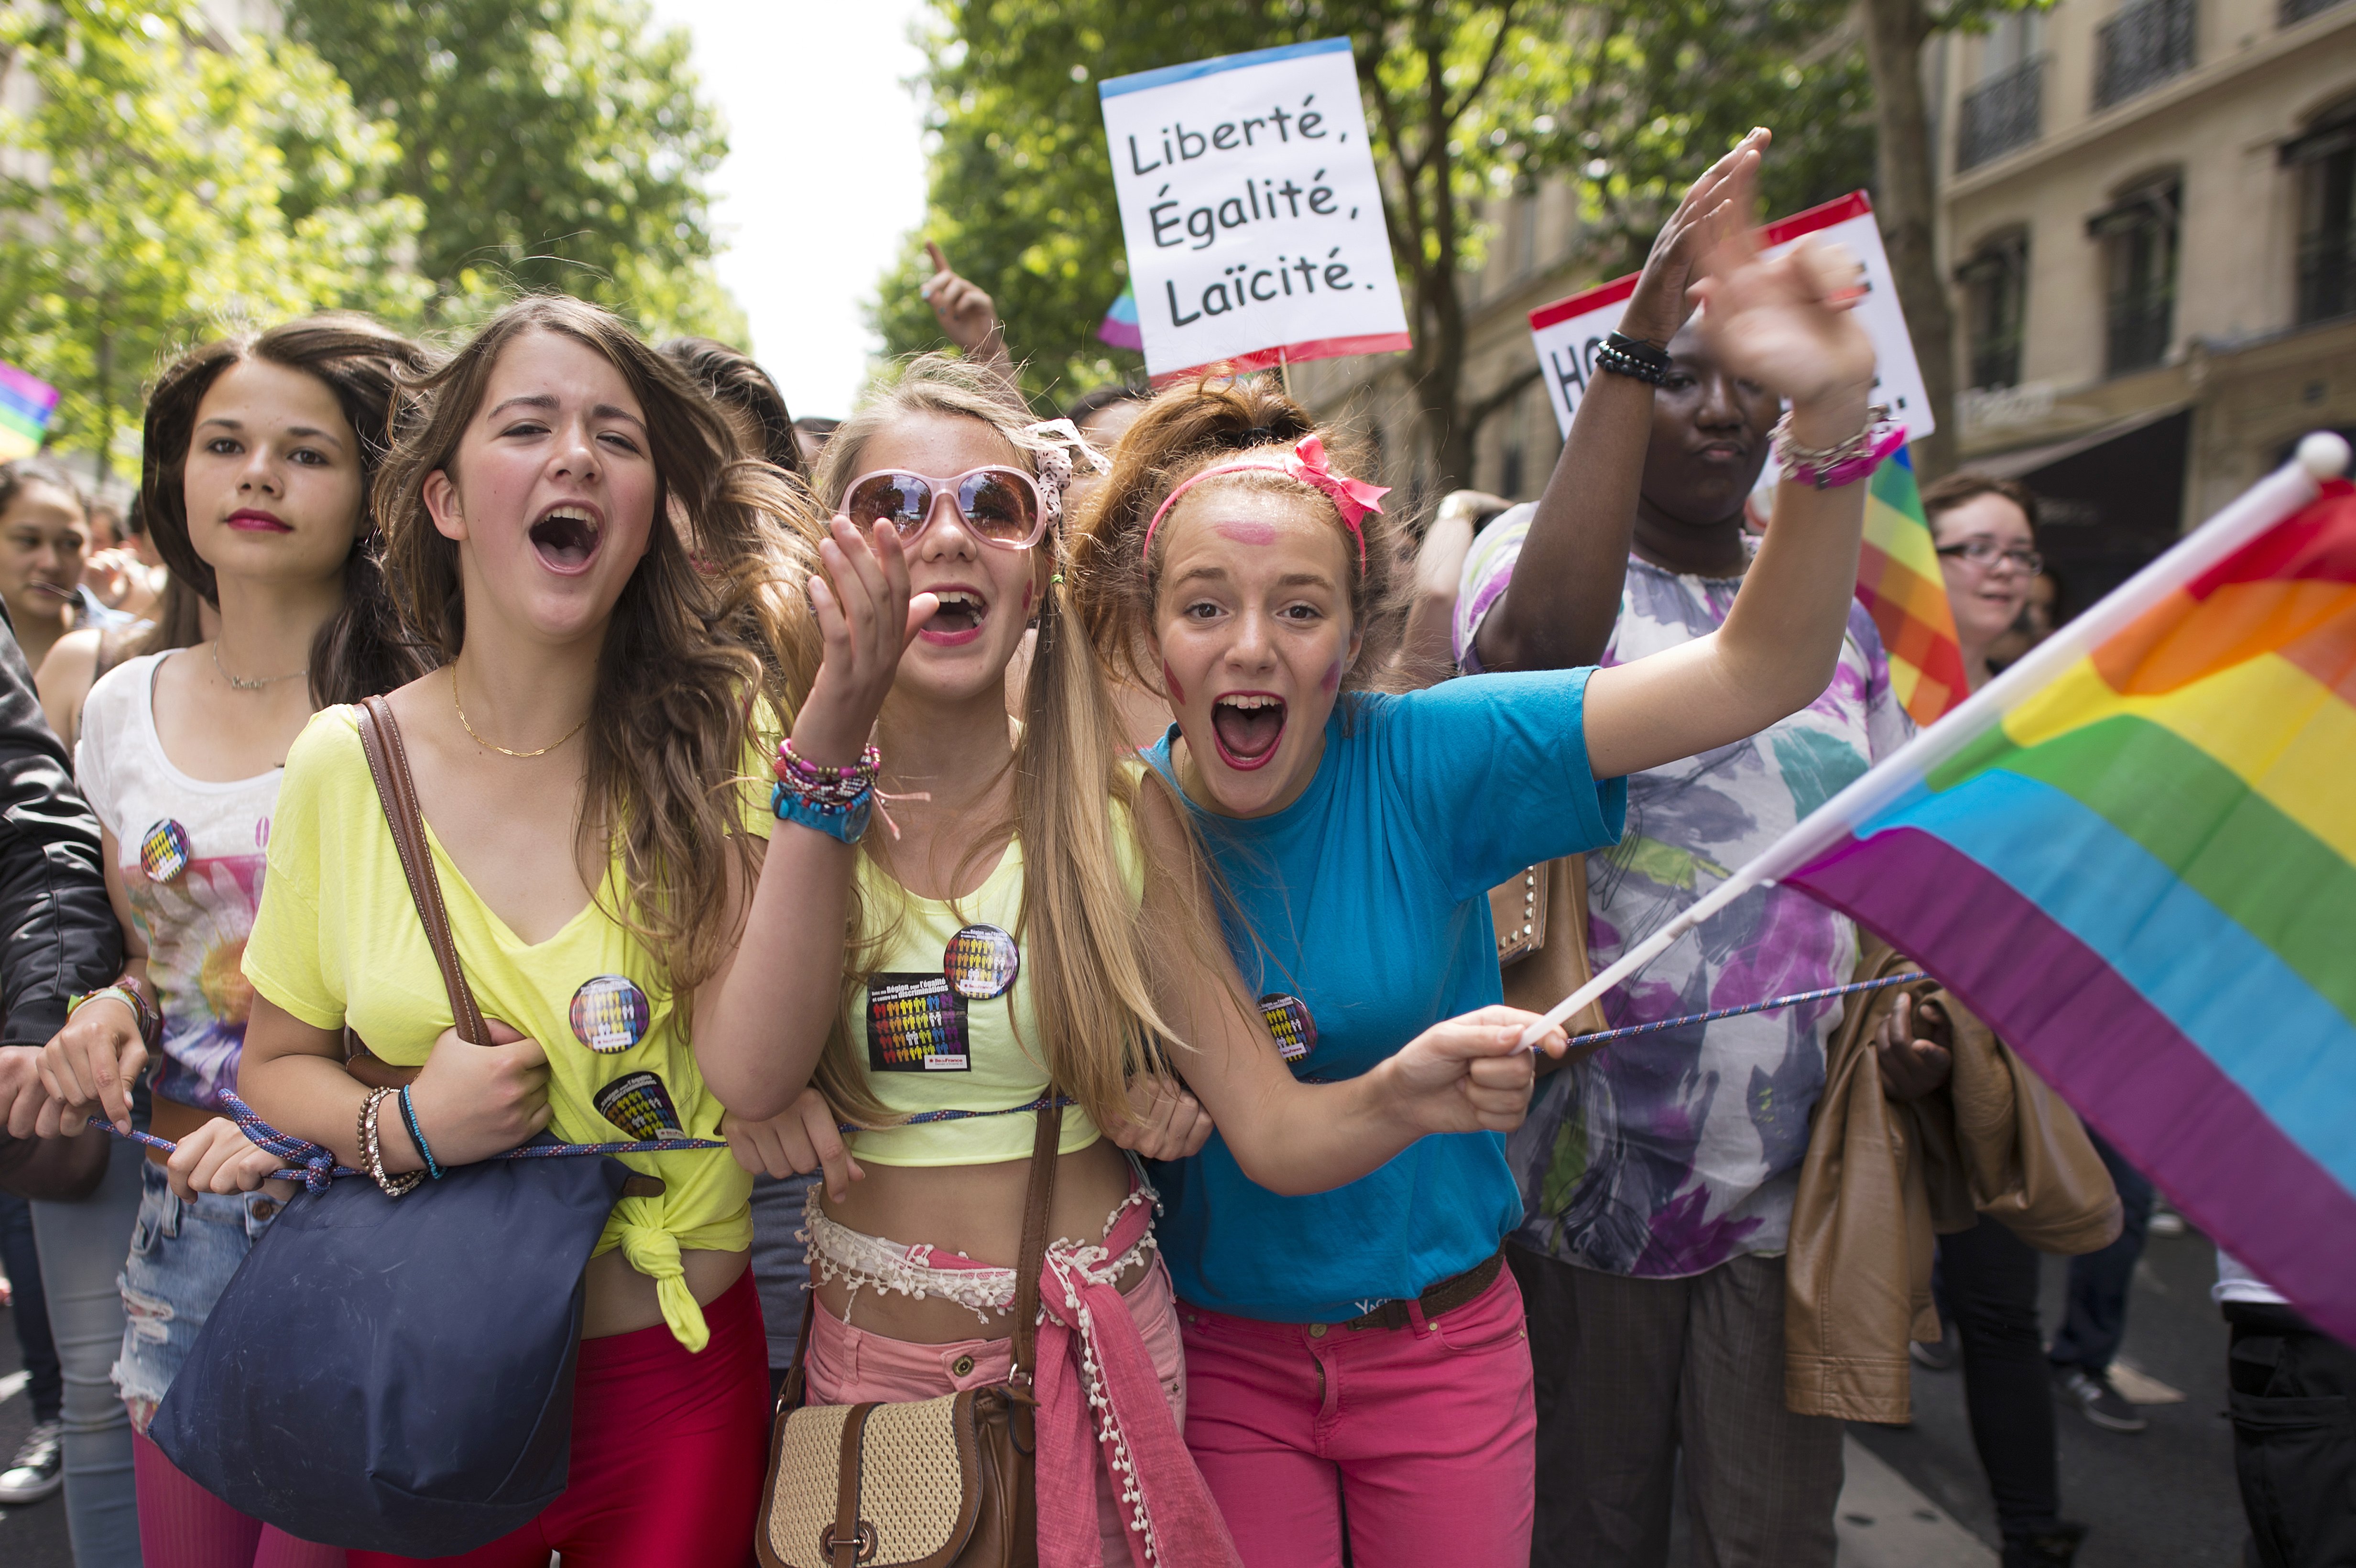 Girls parade during the homosexual, lesbian, bisexual and transgender (HLBT) visibility march, the Gay Pride, on June 29, 2013 in Paris. AFP PHOTO / LIONEL BONAVENTURE (Photo credit should read LIONEL BONAVENTURE/AFP/Getty Images)